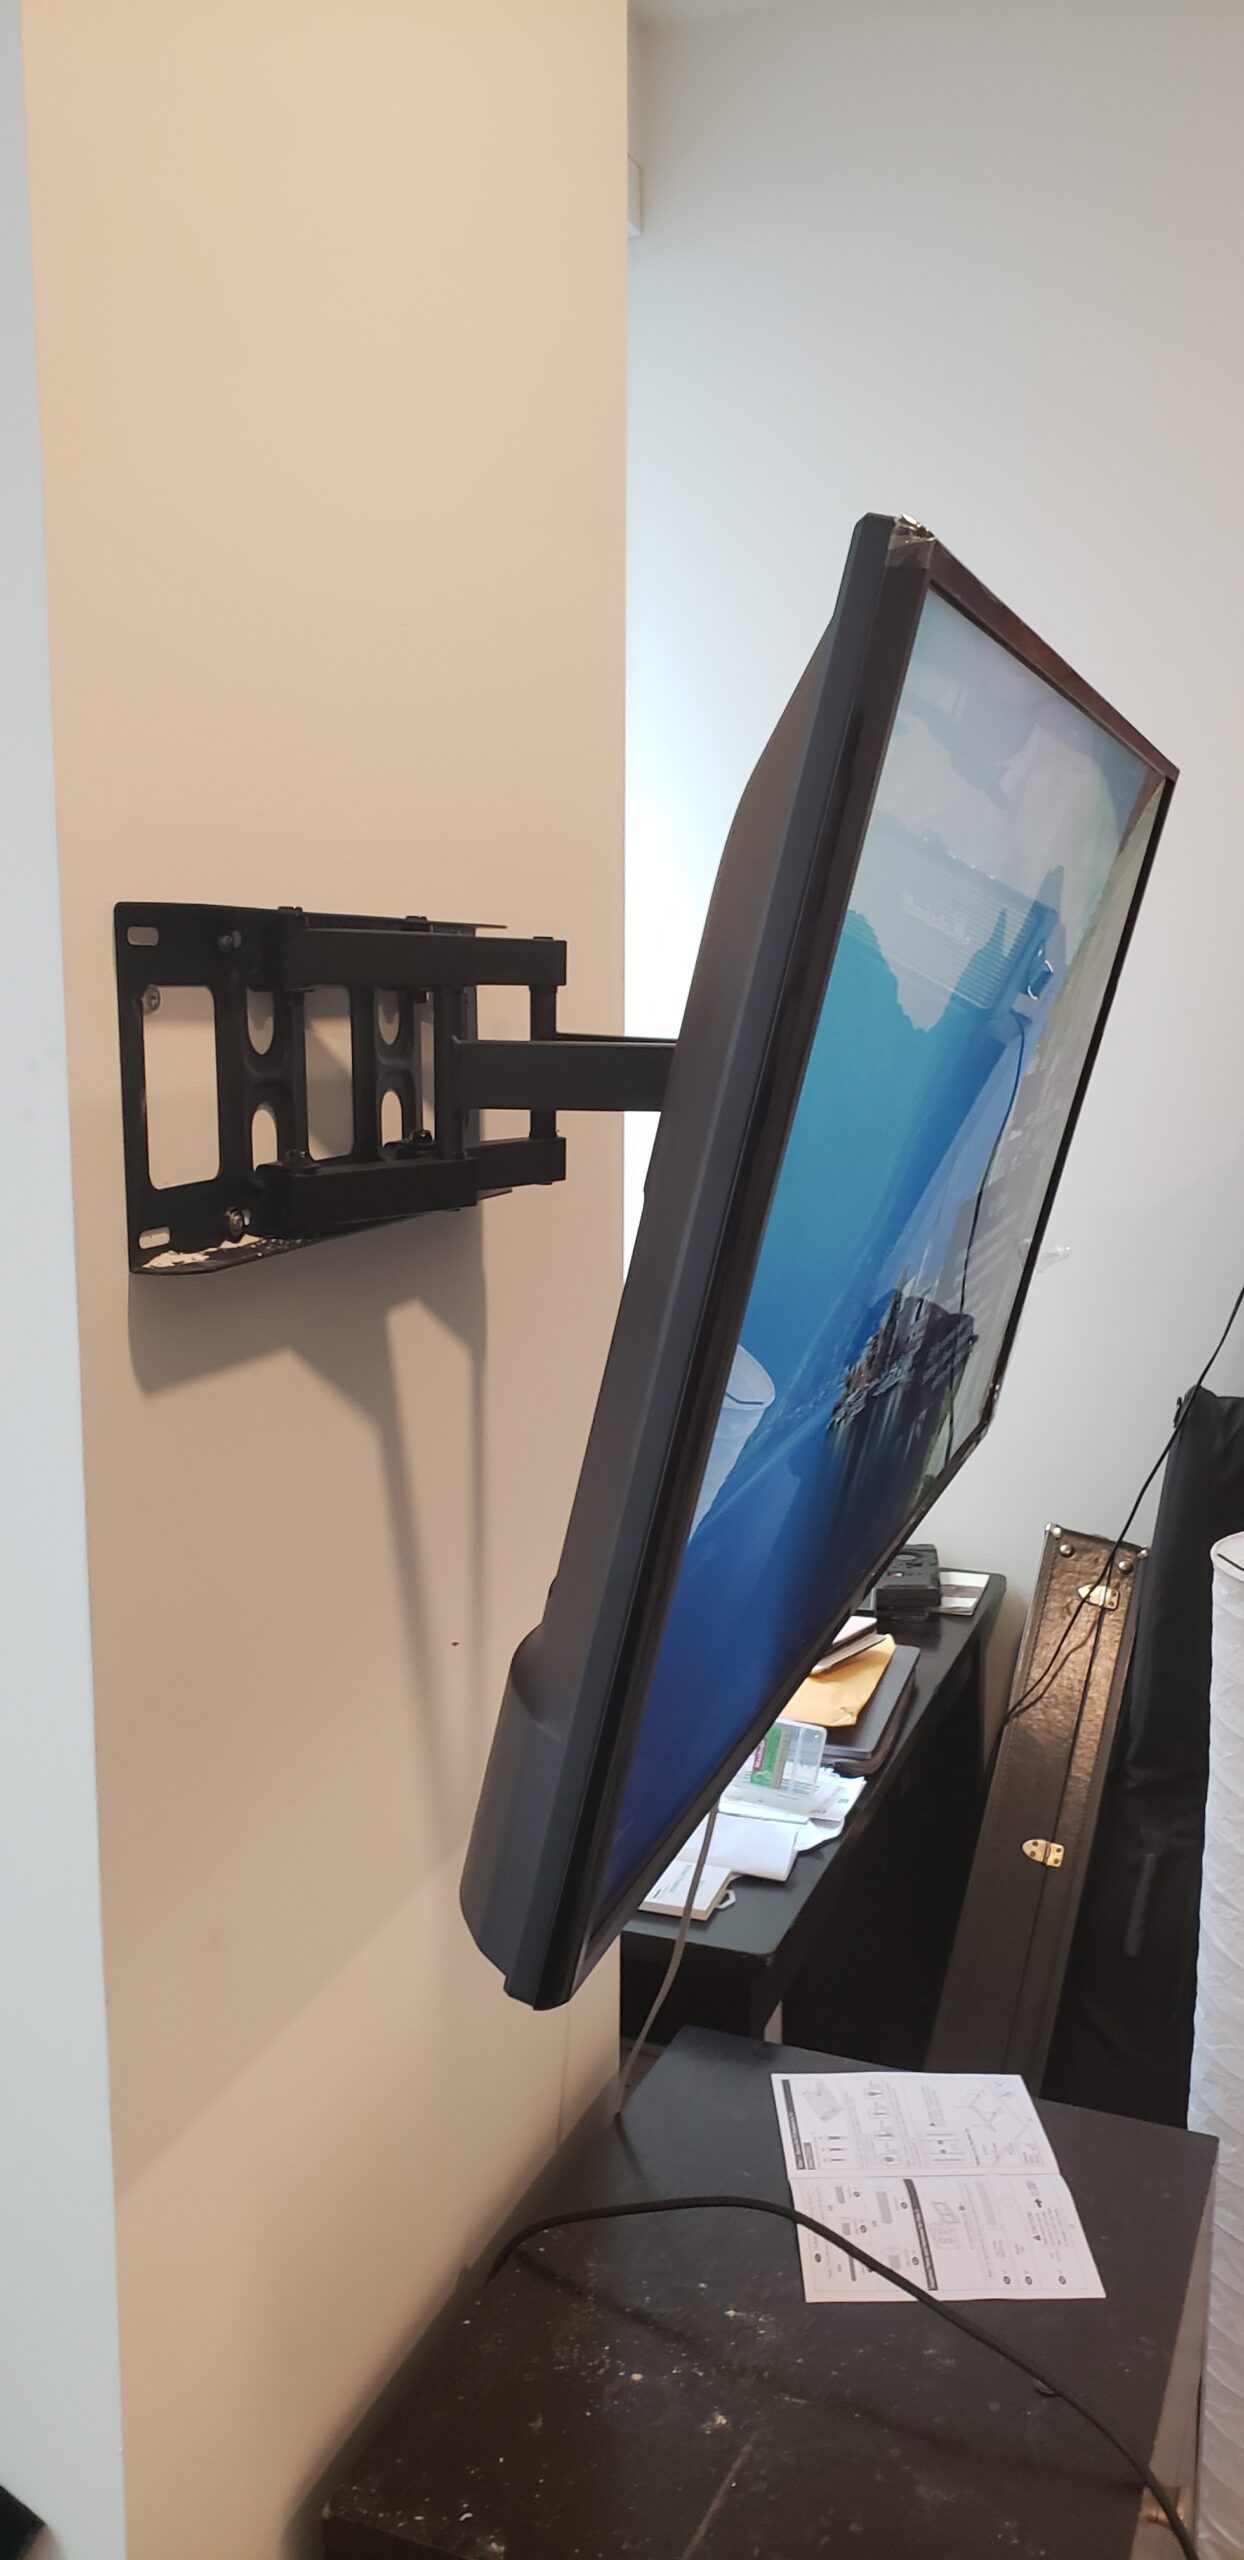 Reach out if you need help with TV Mounting!